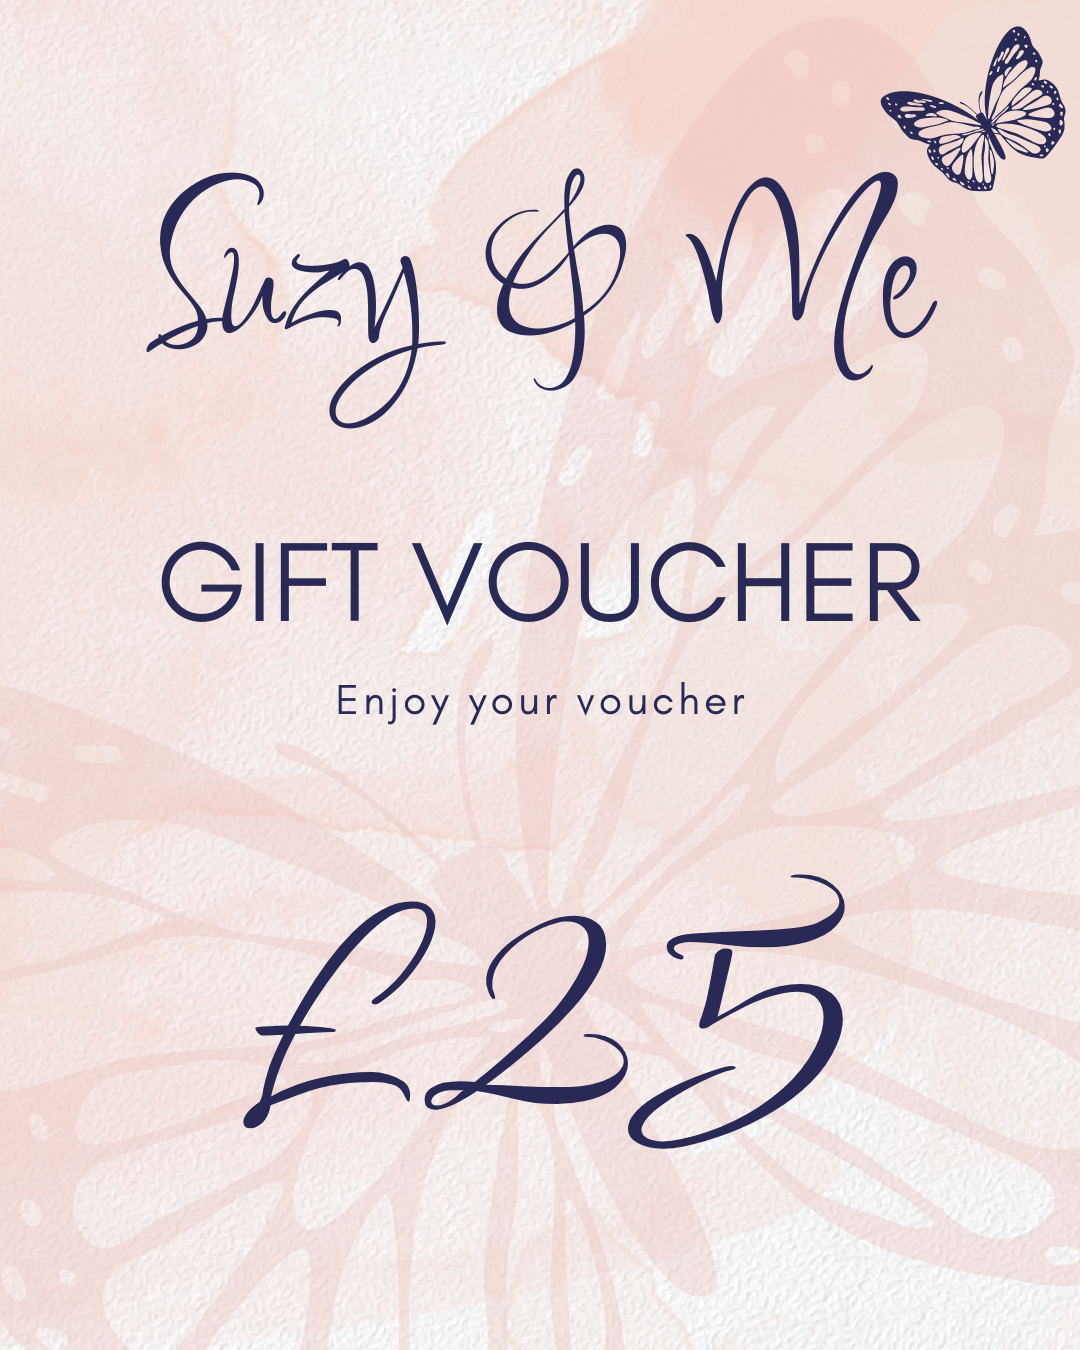 Suzy & Me Collection Gift Voucher